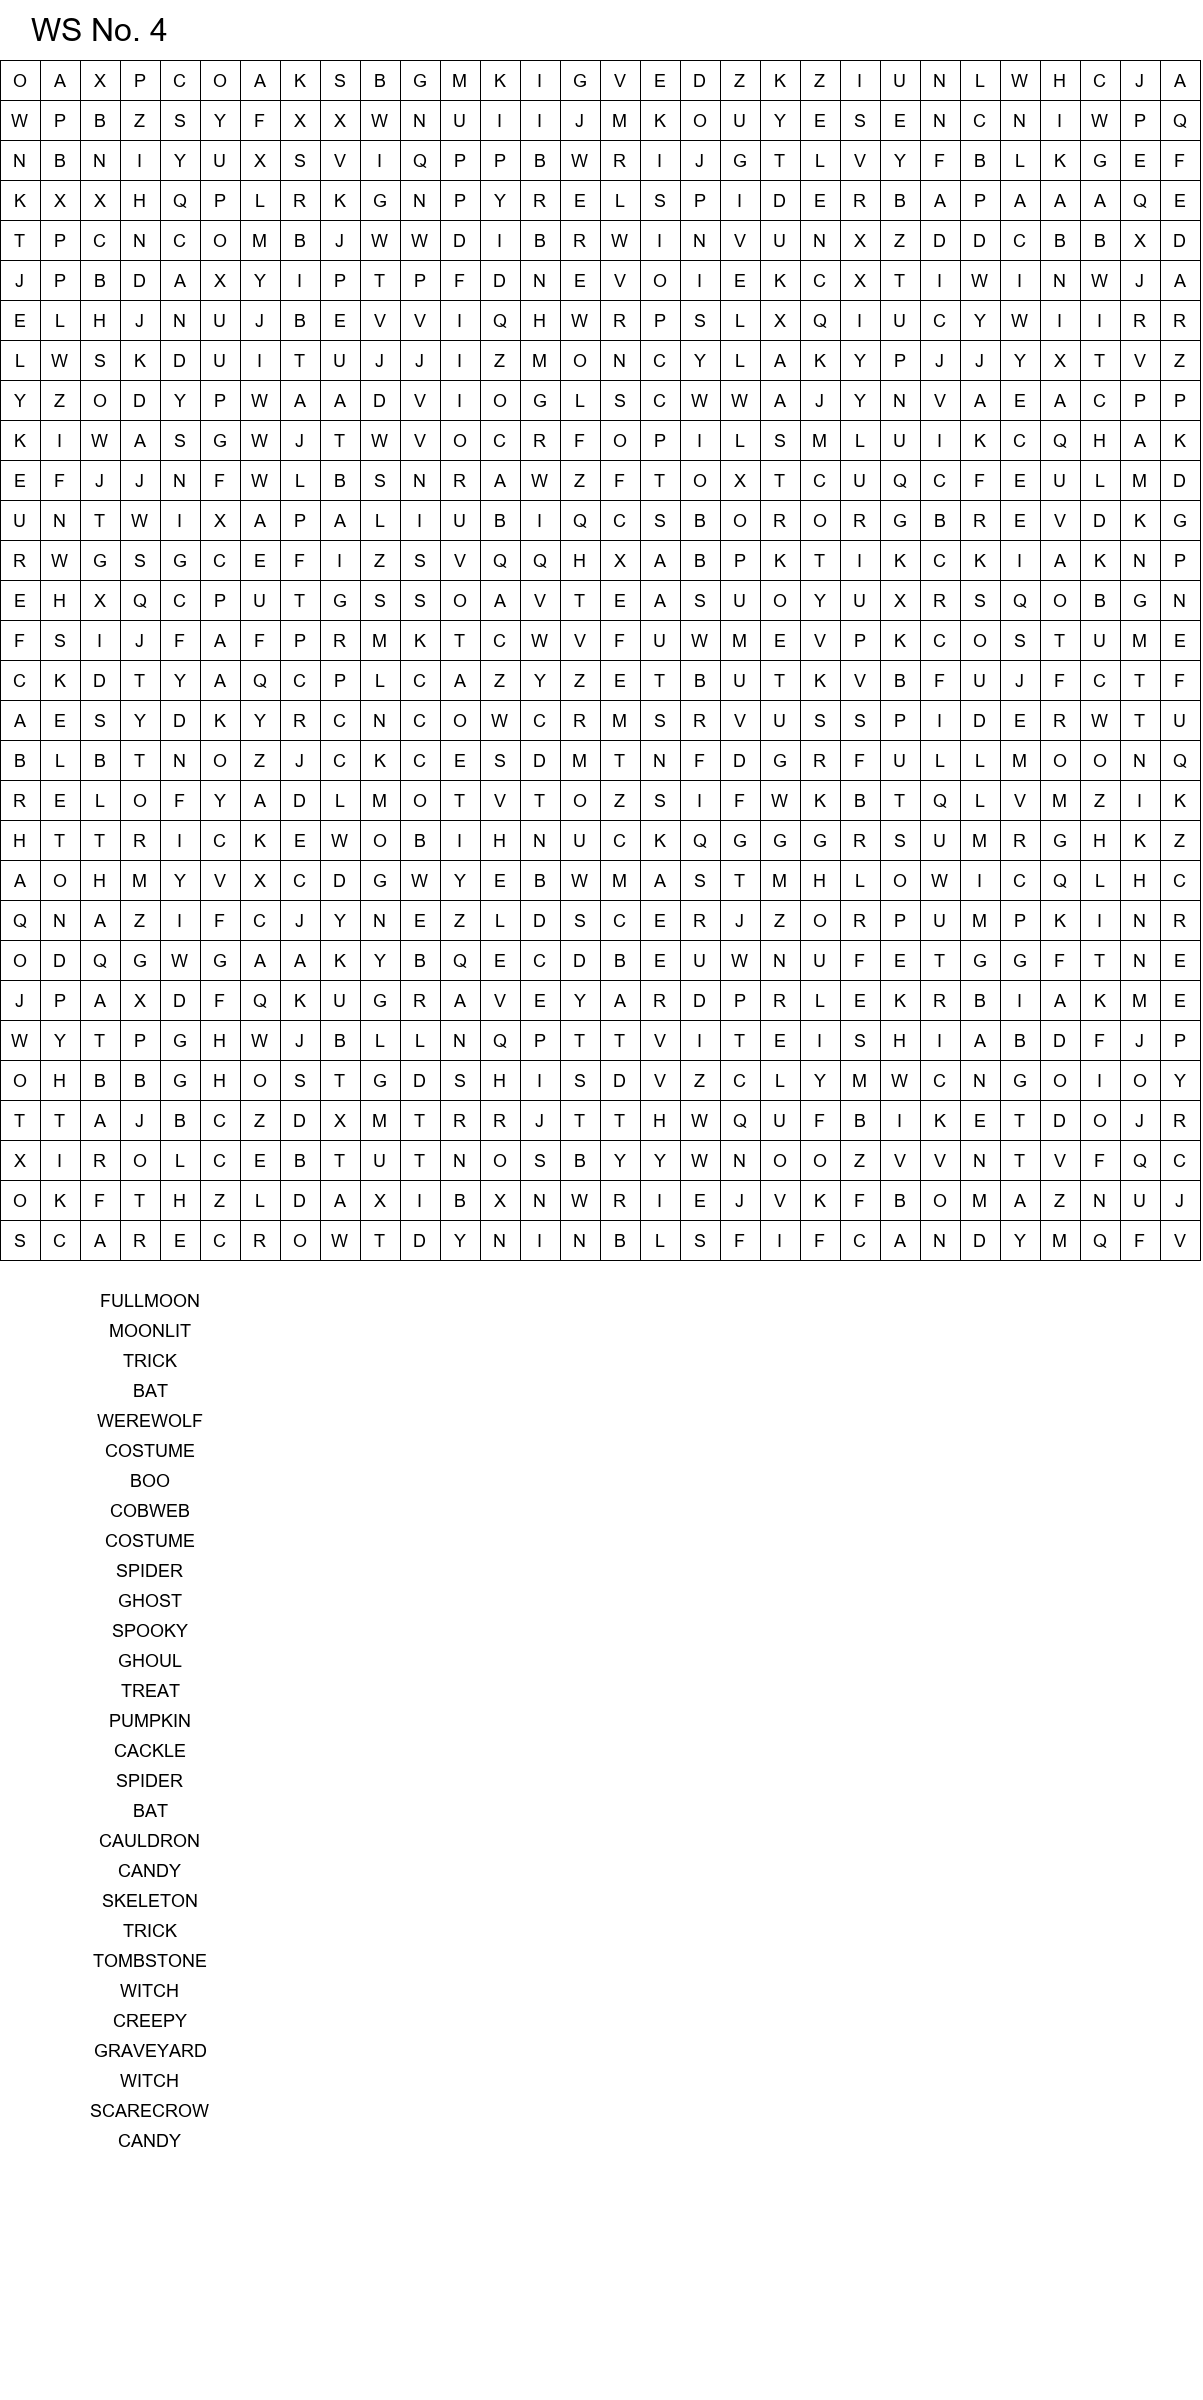 Challenging Halloween word search for adults size 30x30 No 4